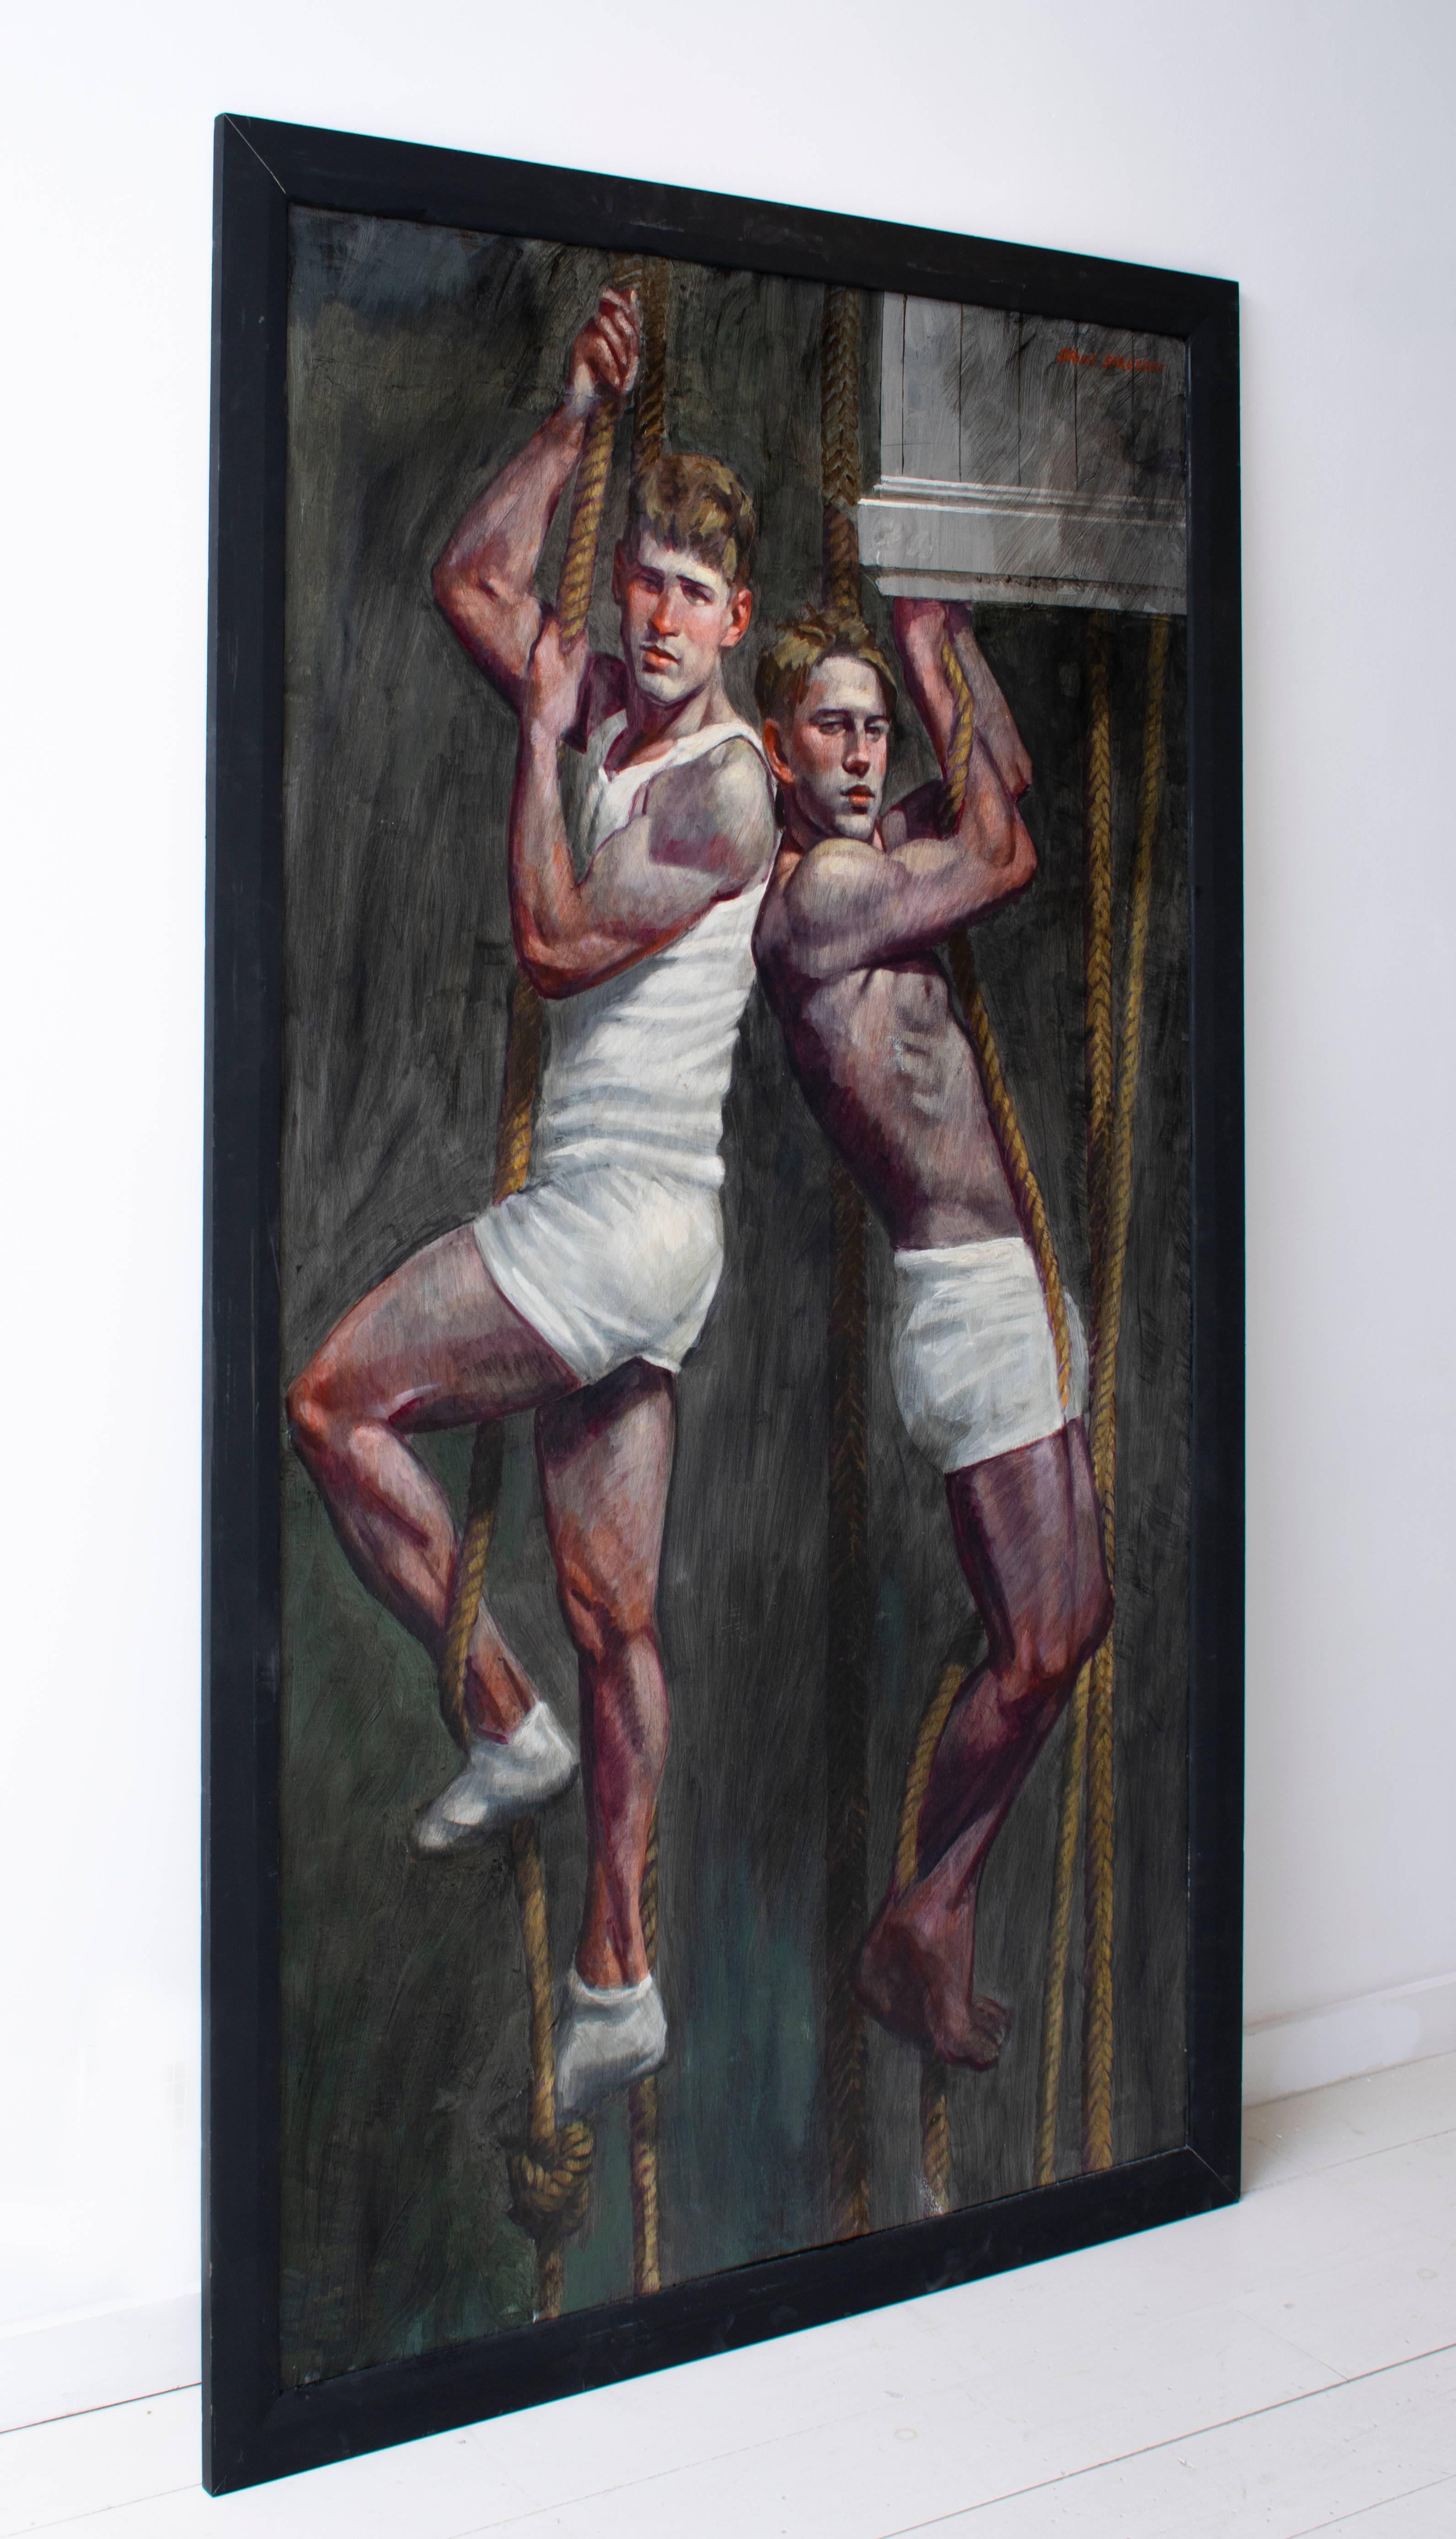 Boys on Ropes (Two Male Athletes Climbing Ropes by Mark Beard) 1